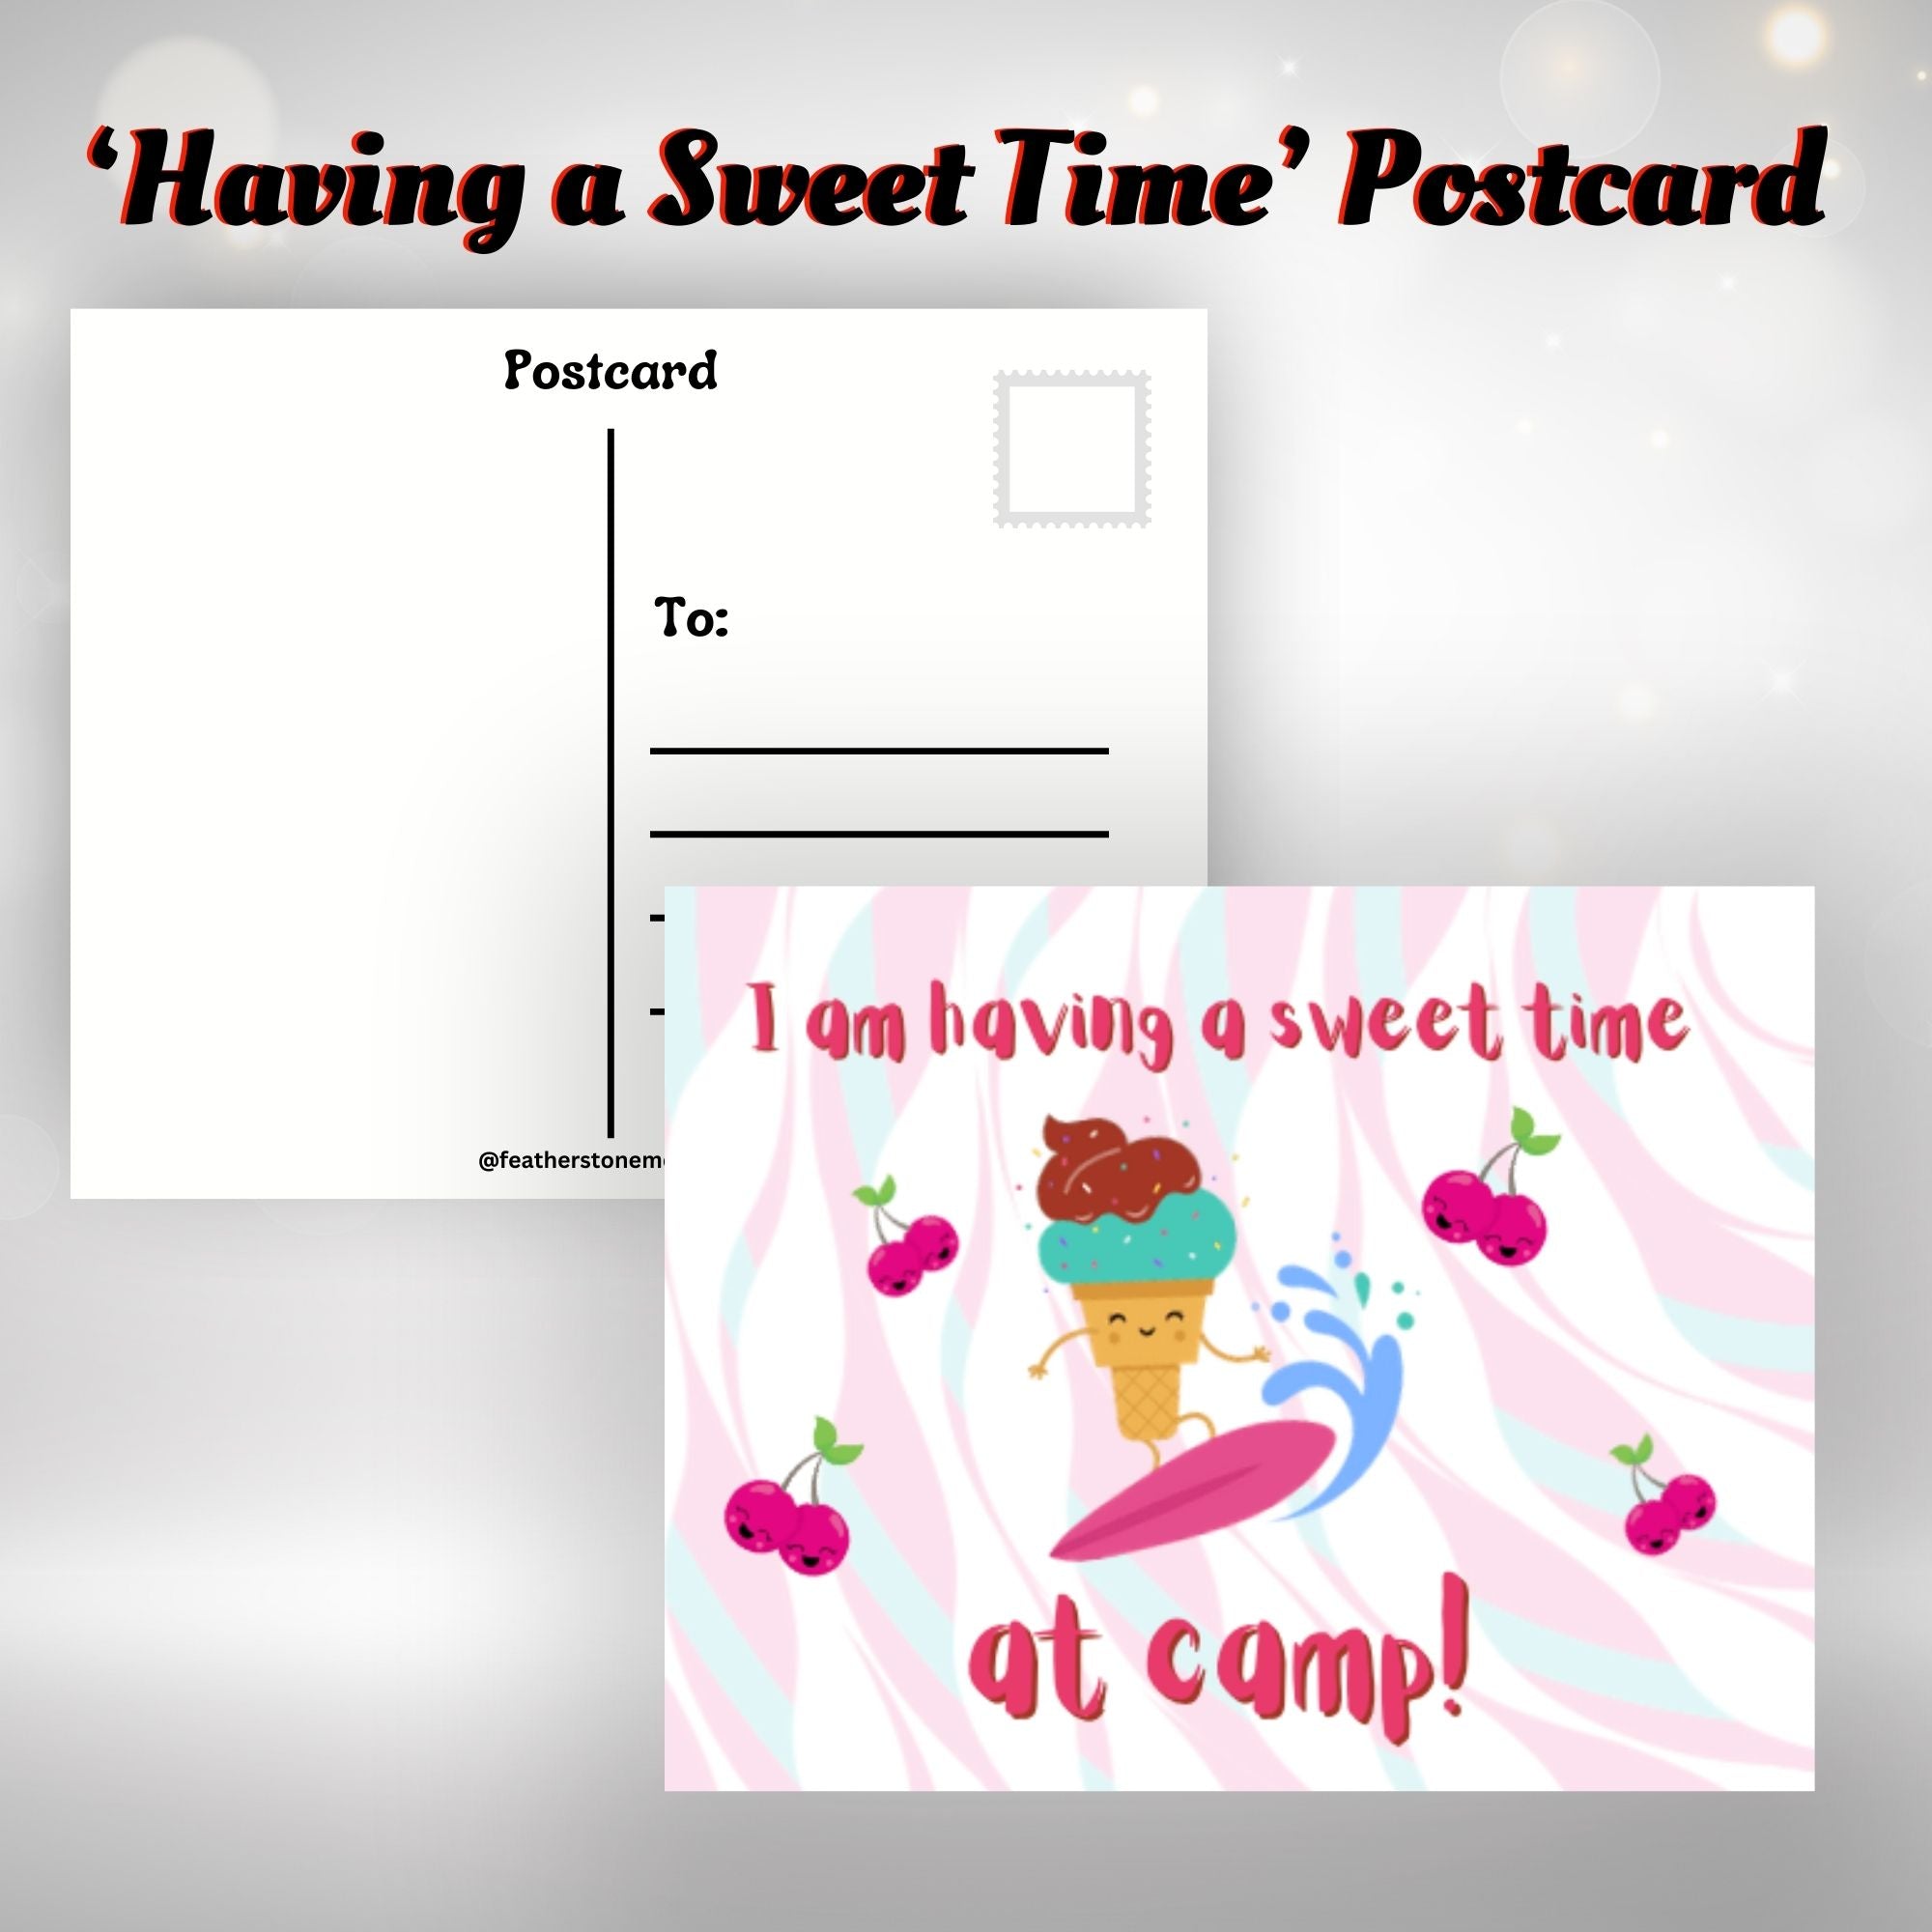 This image shows the I am having a sweet time at camp! postcard with a surfing ice cream cone surrounded by four happy pairs of cherries.